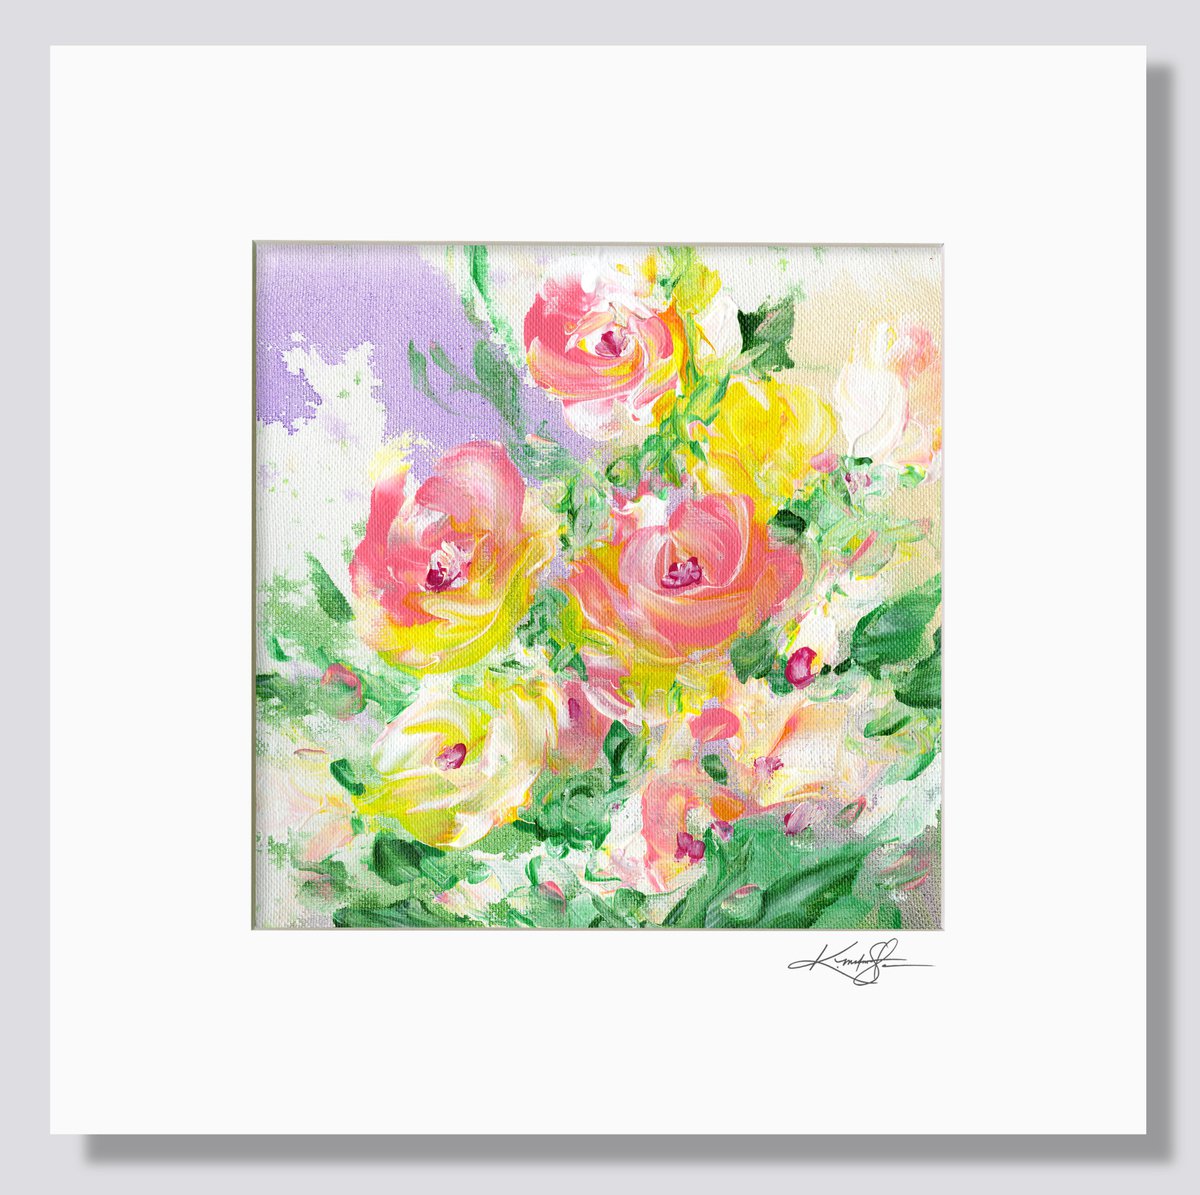 Floral Melody 37 - Floral Abstract Painting by Kathy Morton Stanion by Kathy Morton Stanion